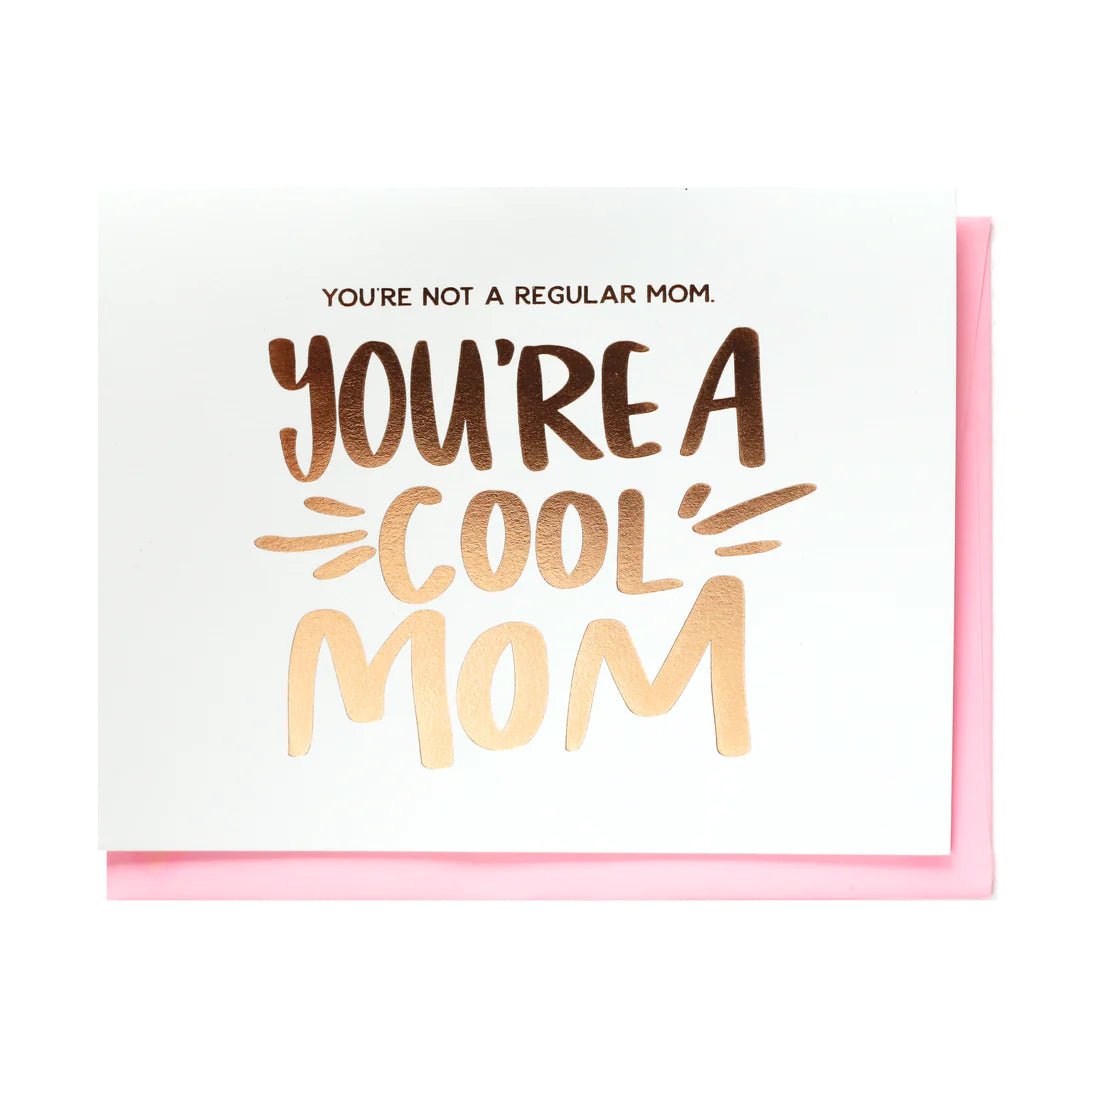 You're a Cool Mom, Greeting Card - SO PRETTY CARA COTTER